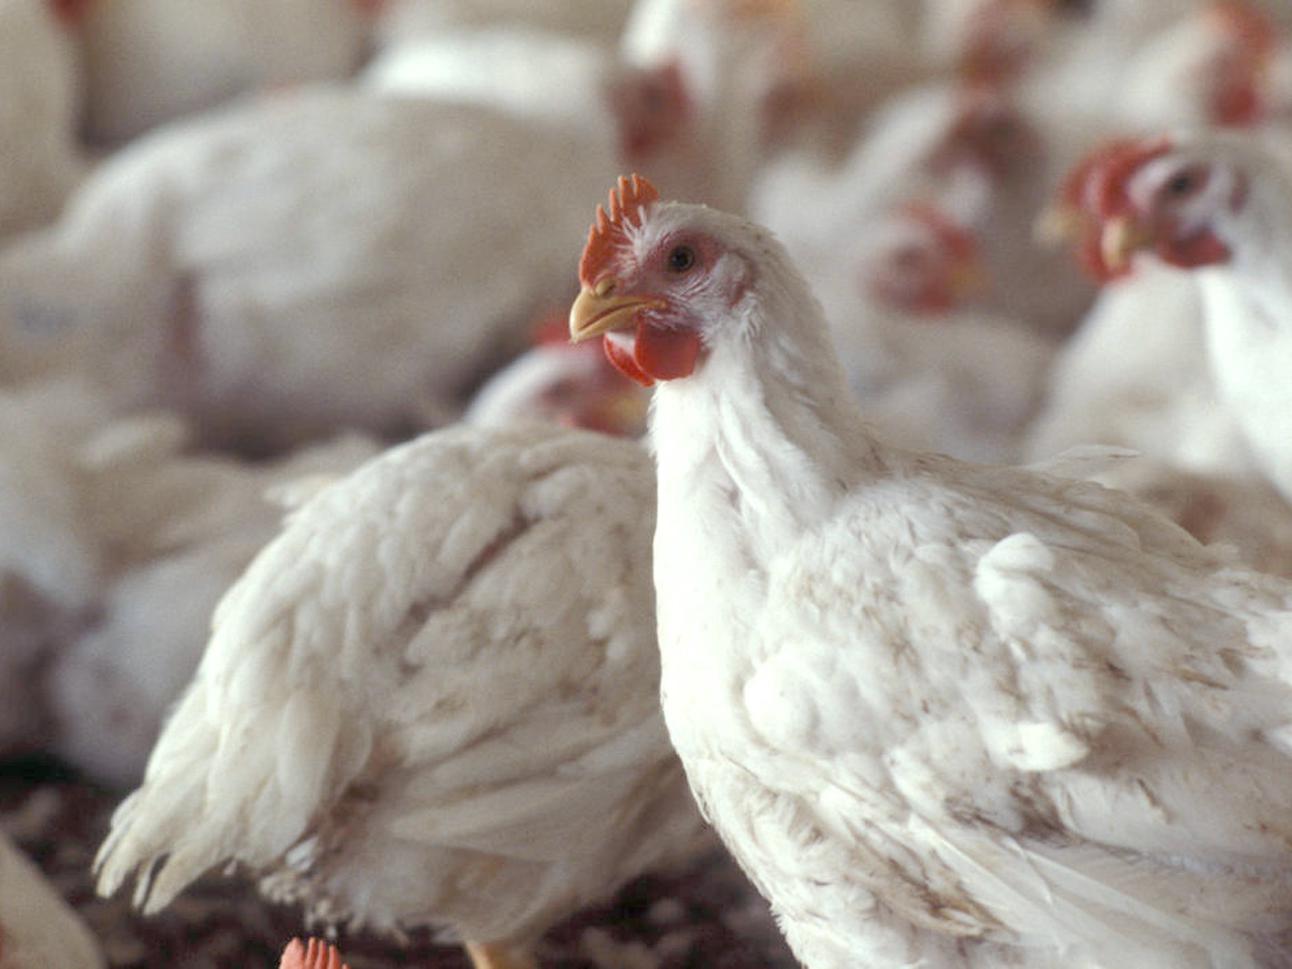 Poultry remains Mississippi's largest agricultural commodity, producing 10 percent of the nation's poultry supply. (File Photo)